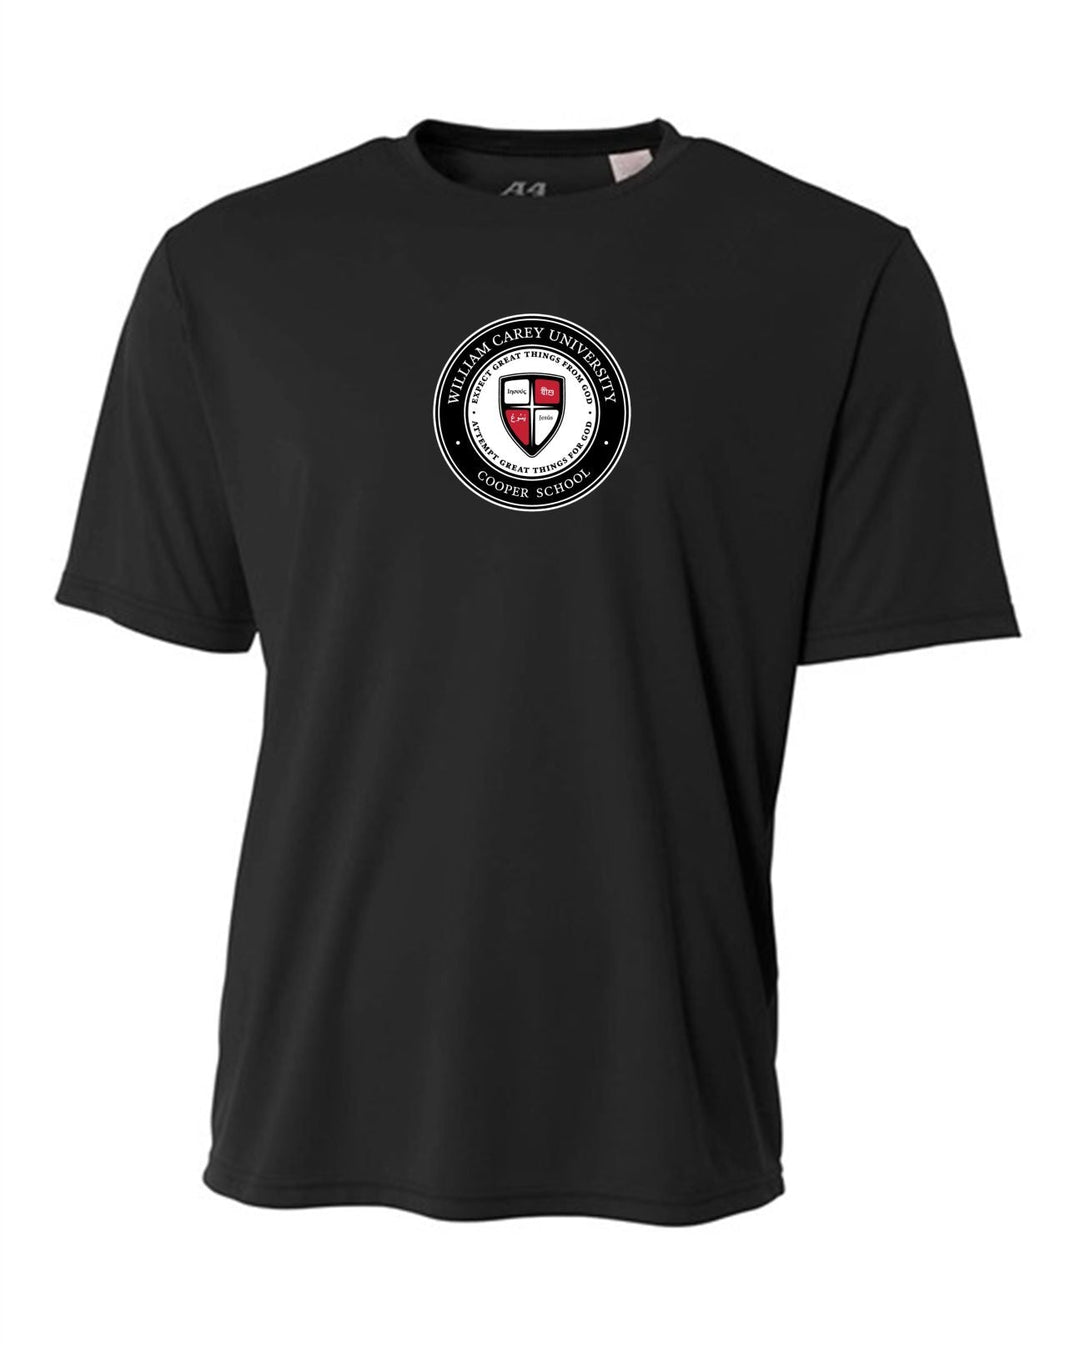 WCU Cooper School Of Missions & Ministry Youth Short-Sleeve Performance Shirt WCU CSMM Black Youth Small - Third Coast Soccer